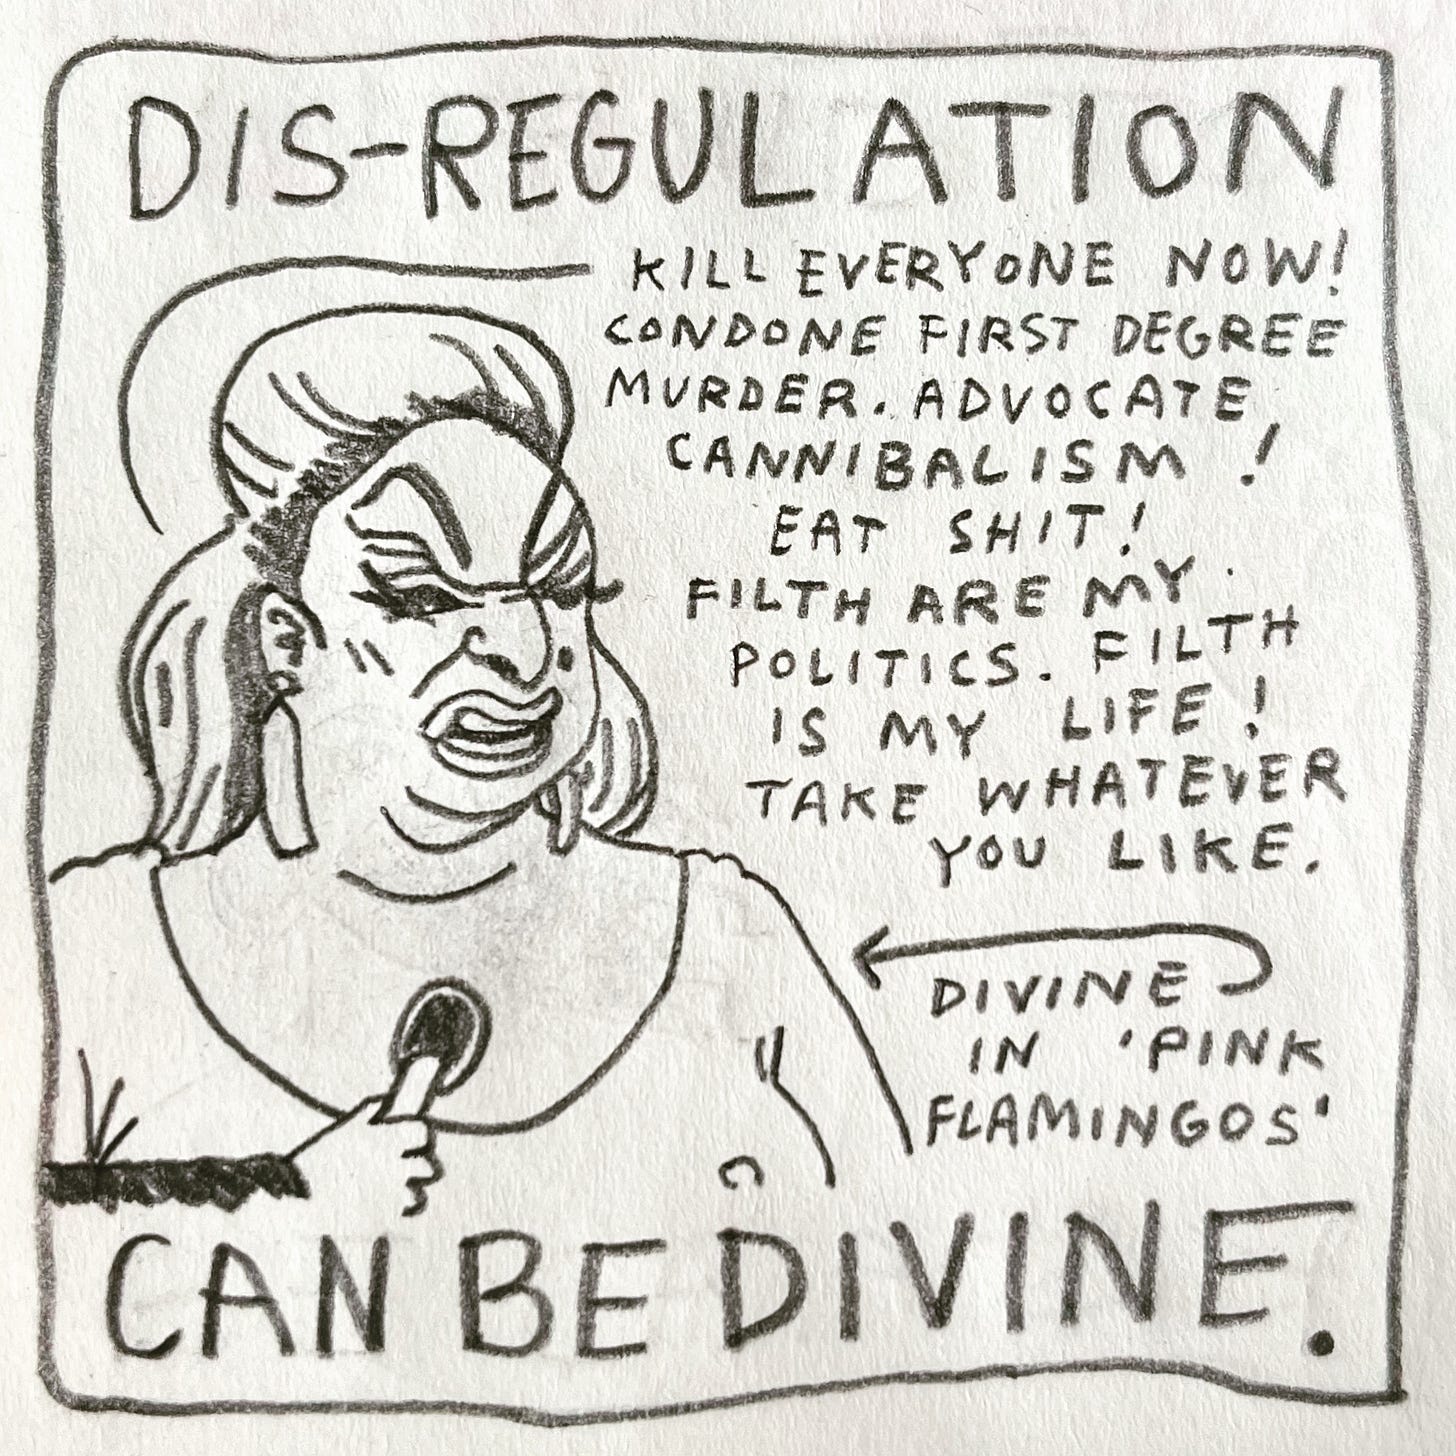 Panel 5: dis-regulation can be divine. Image: a portrait of a scowling drag queen in intense, high-camp makeup. She is wearing a low cut, tight dress and long crystal earrings. A hand is holding a microphone in front of her chest. She exclaims, “Kill everyone now! Condone first degree murder. Advocate cannibalism! Eat shit! Filth are my politics. Filth is my life! Take whatever you like." An arrow pointing to her is labeled: Divine in ‘Pink Flamingos’